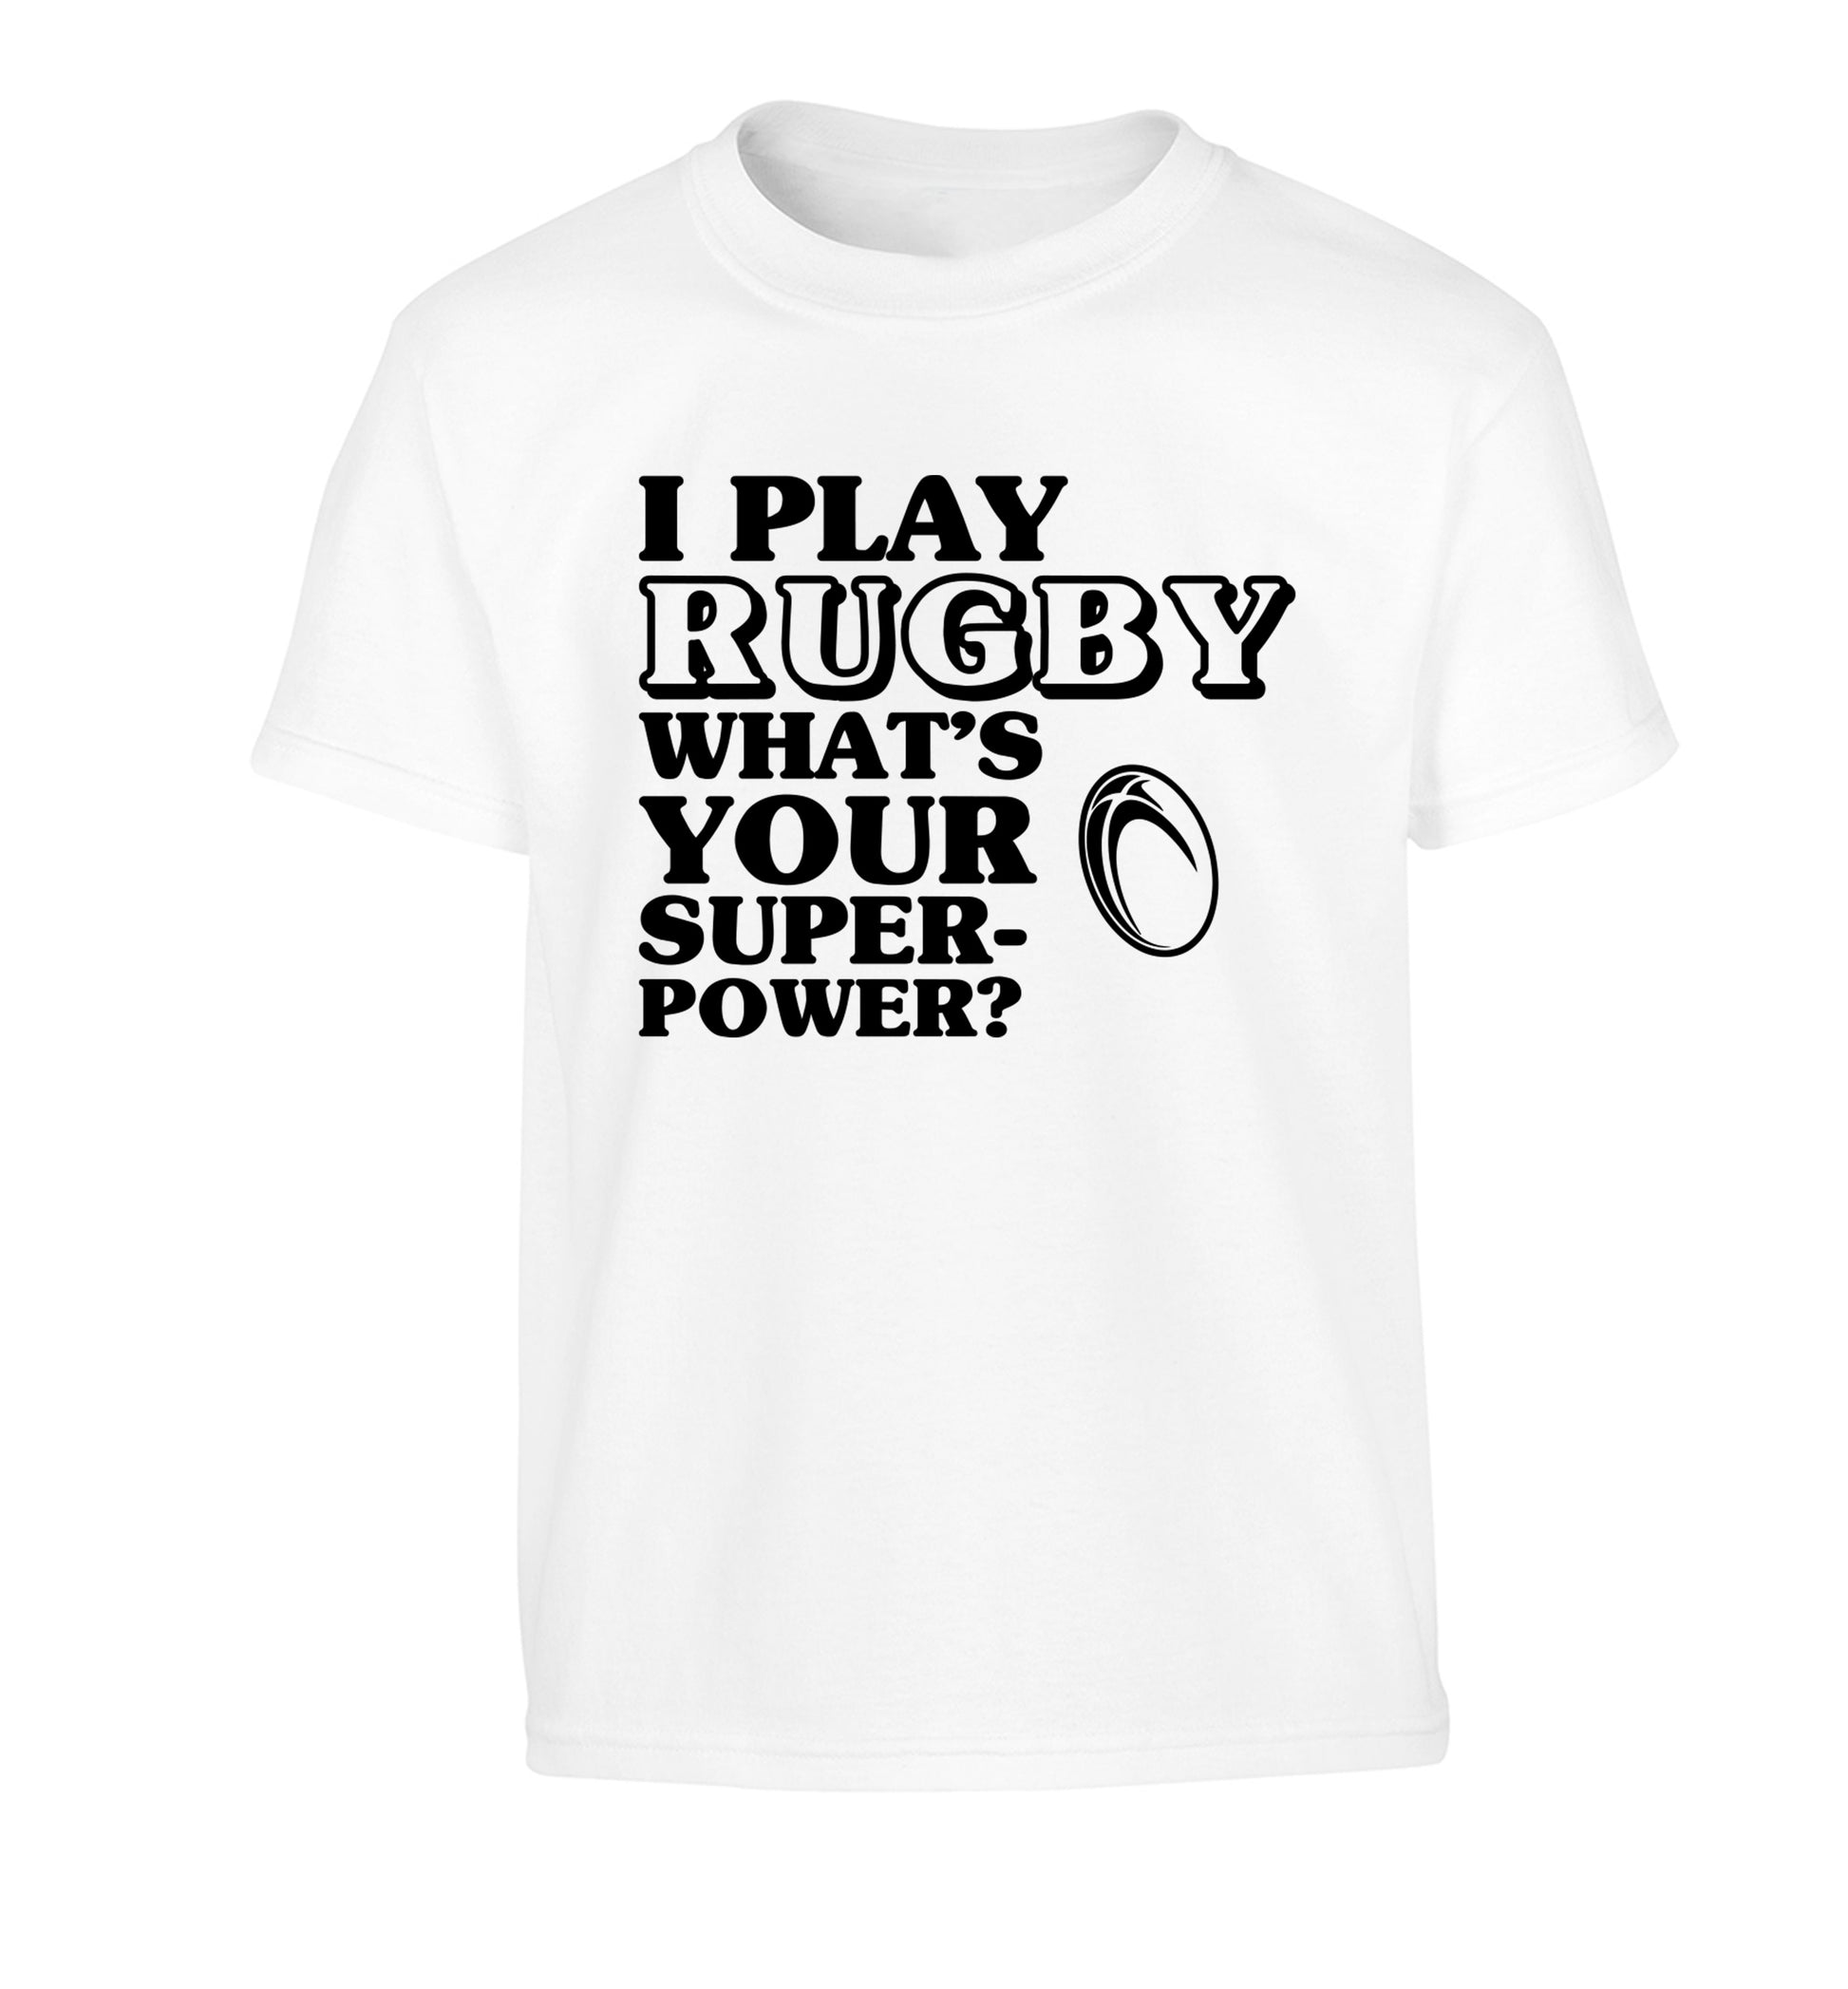 I play rugby what's your superpower? Children's white Tshirt 12-13 Years